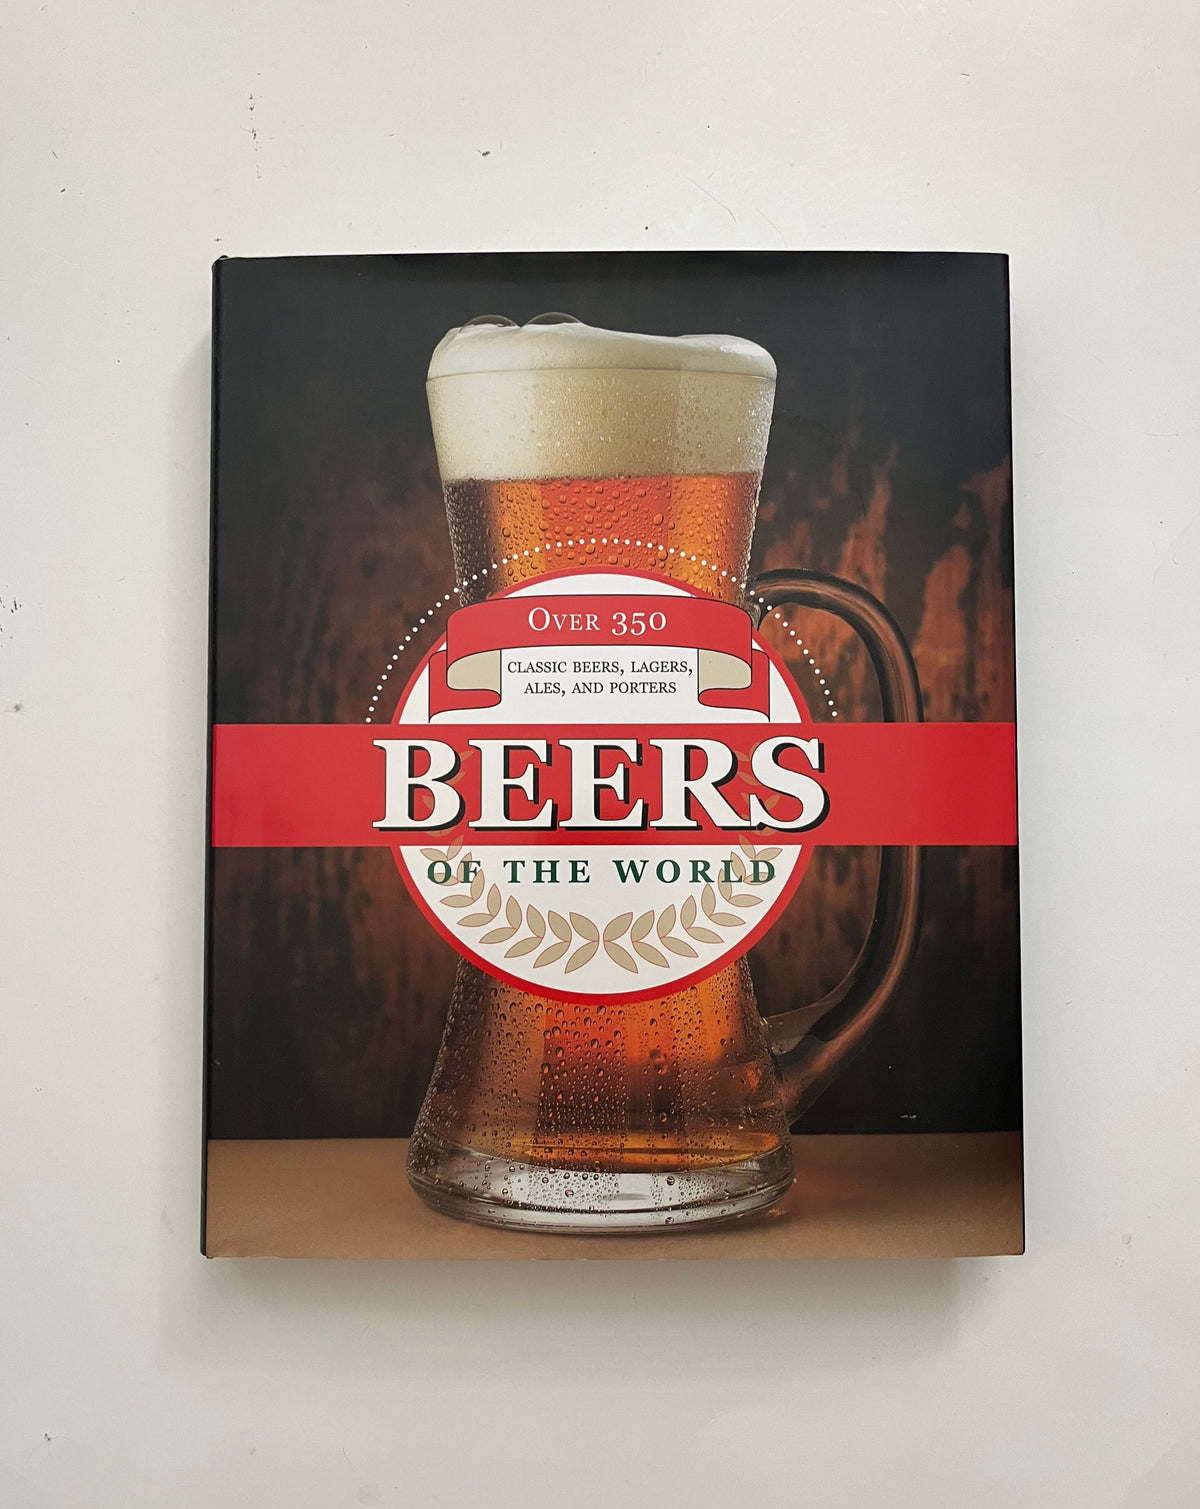 Beers of the World: Classic Beers, Lagers, Ales, and Porters